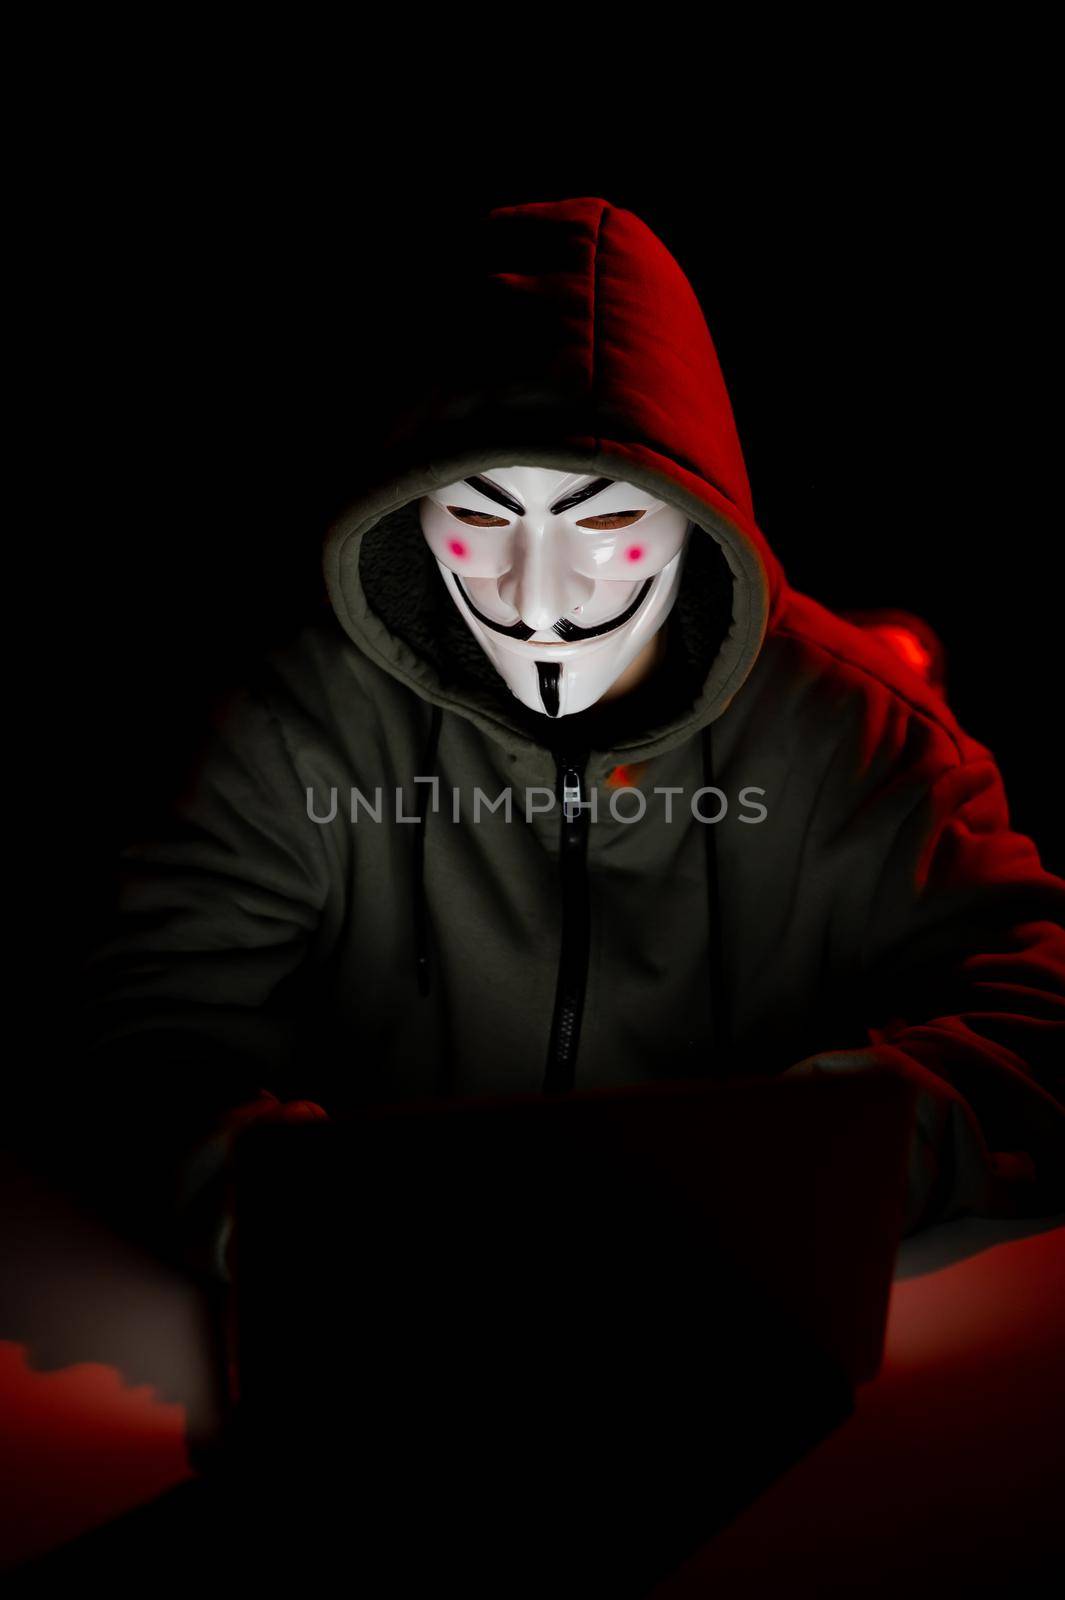 June 5, 2022 Novosibirsk, Russia: Anonymous in a hood is typing on a laptop in the dark in red light